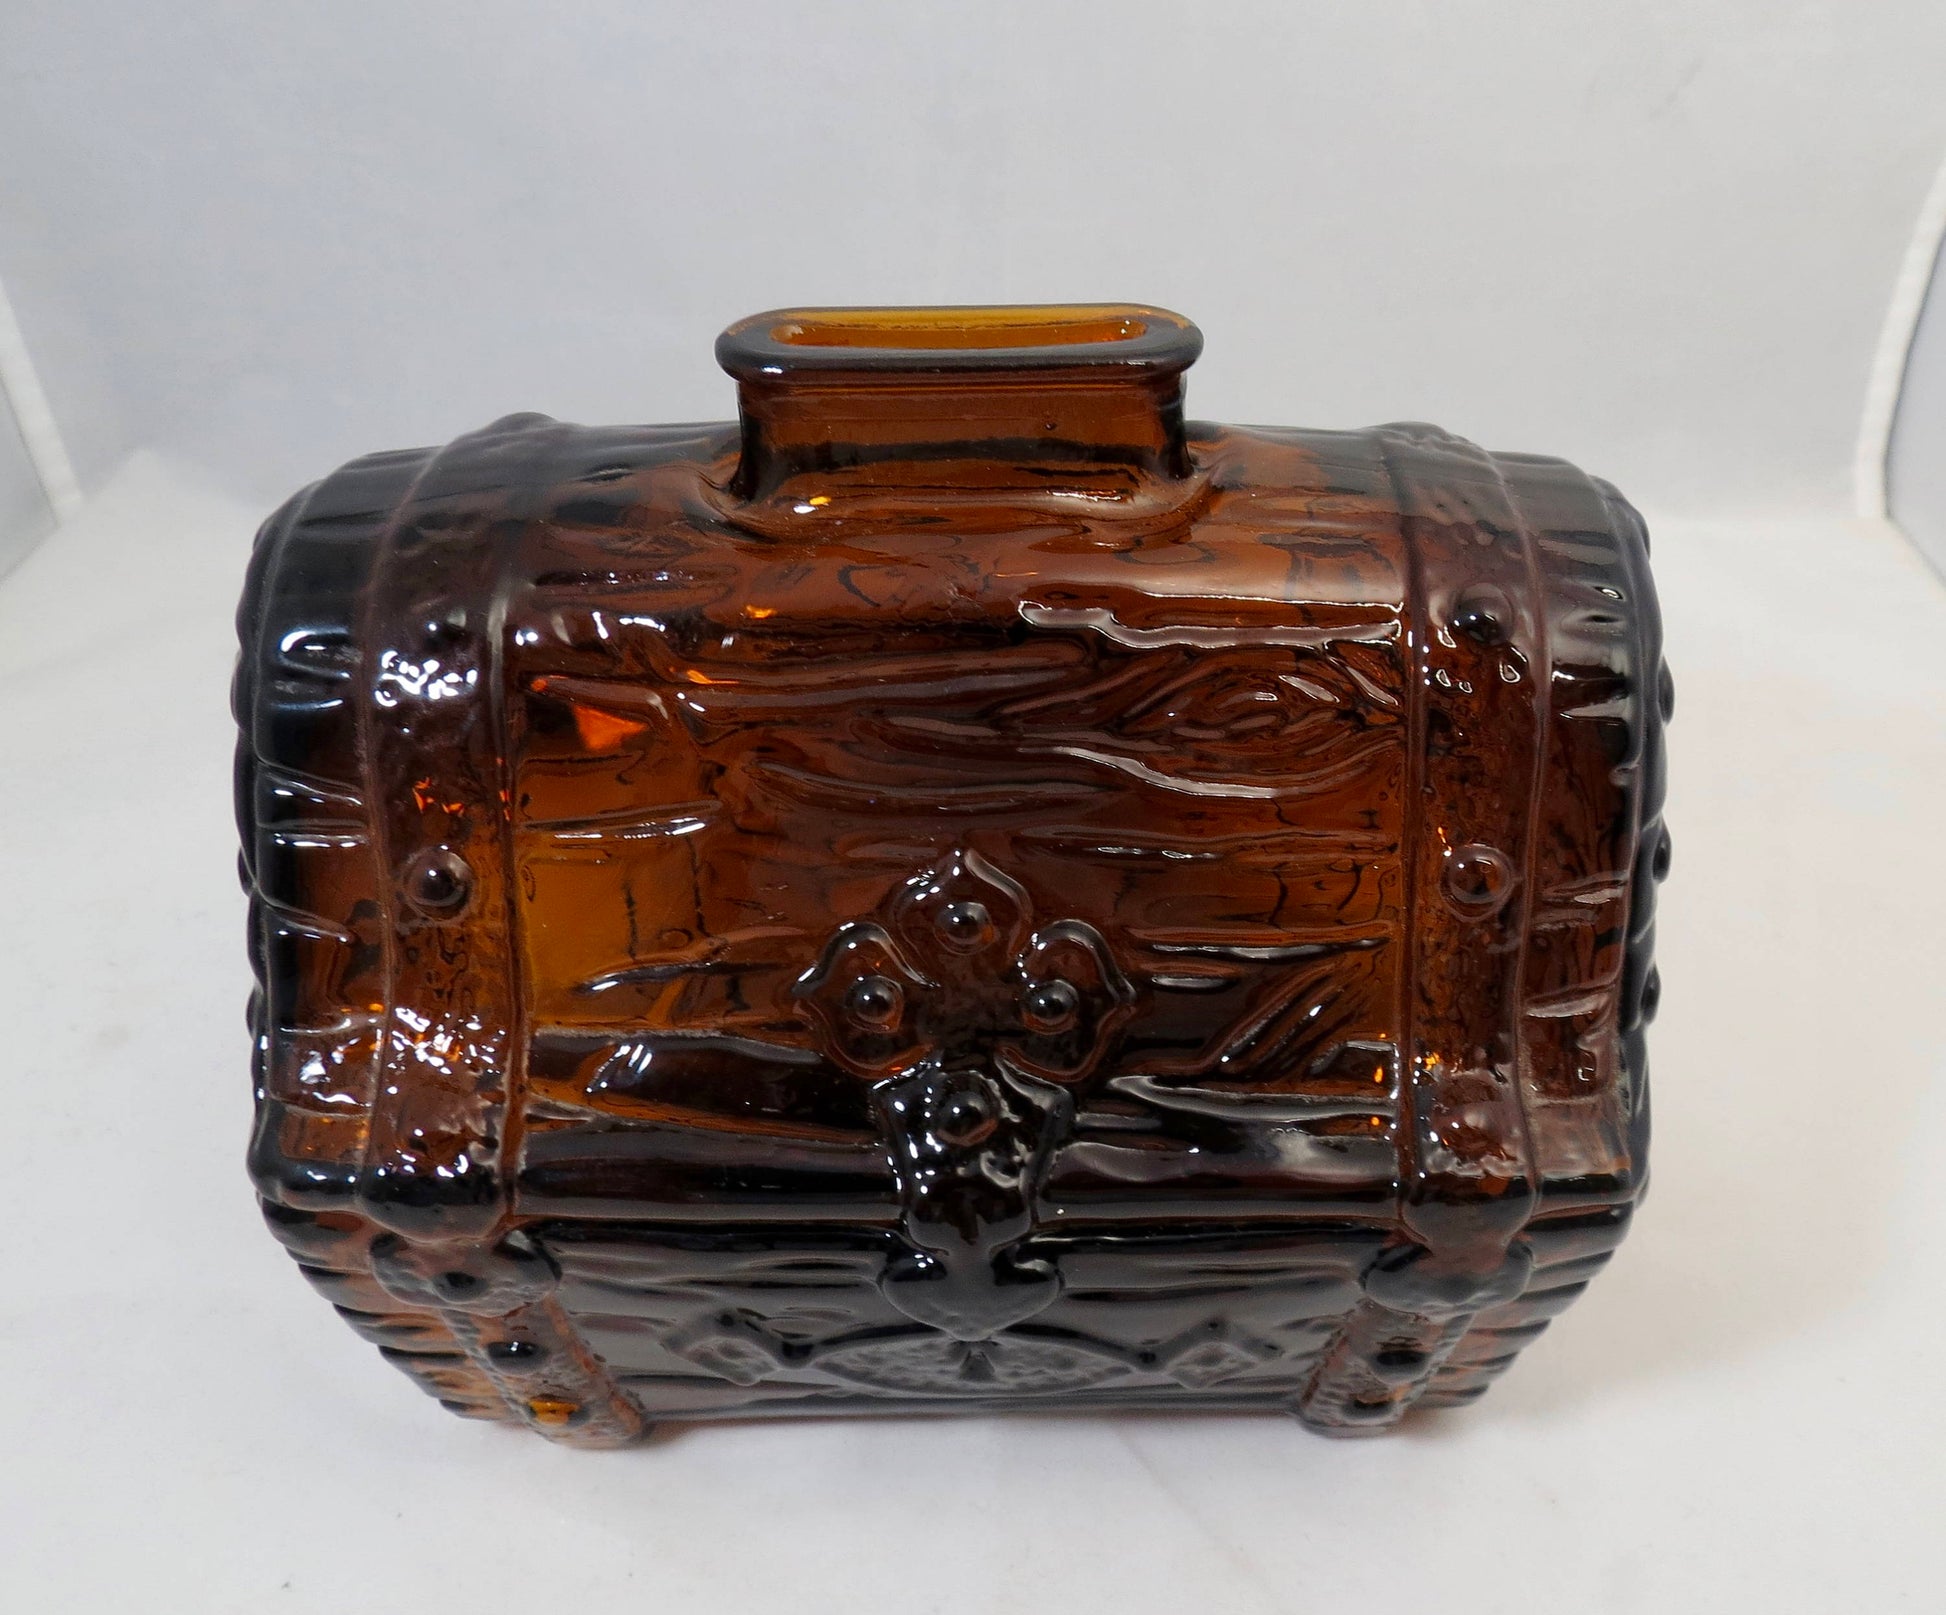 Vintage Glass Treasure Chest Coin Bank - Duckwells